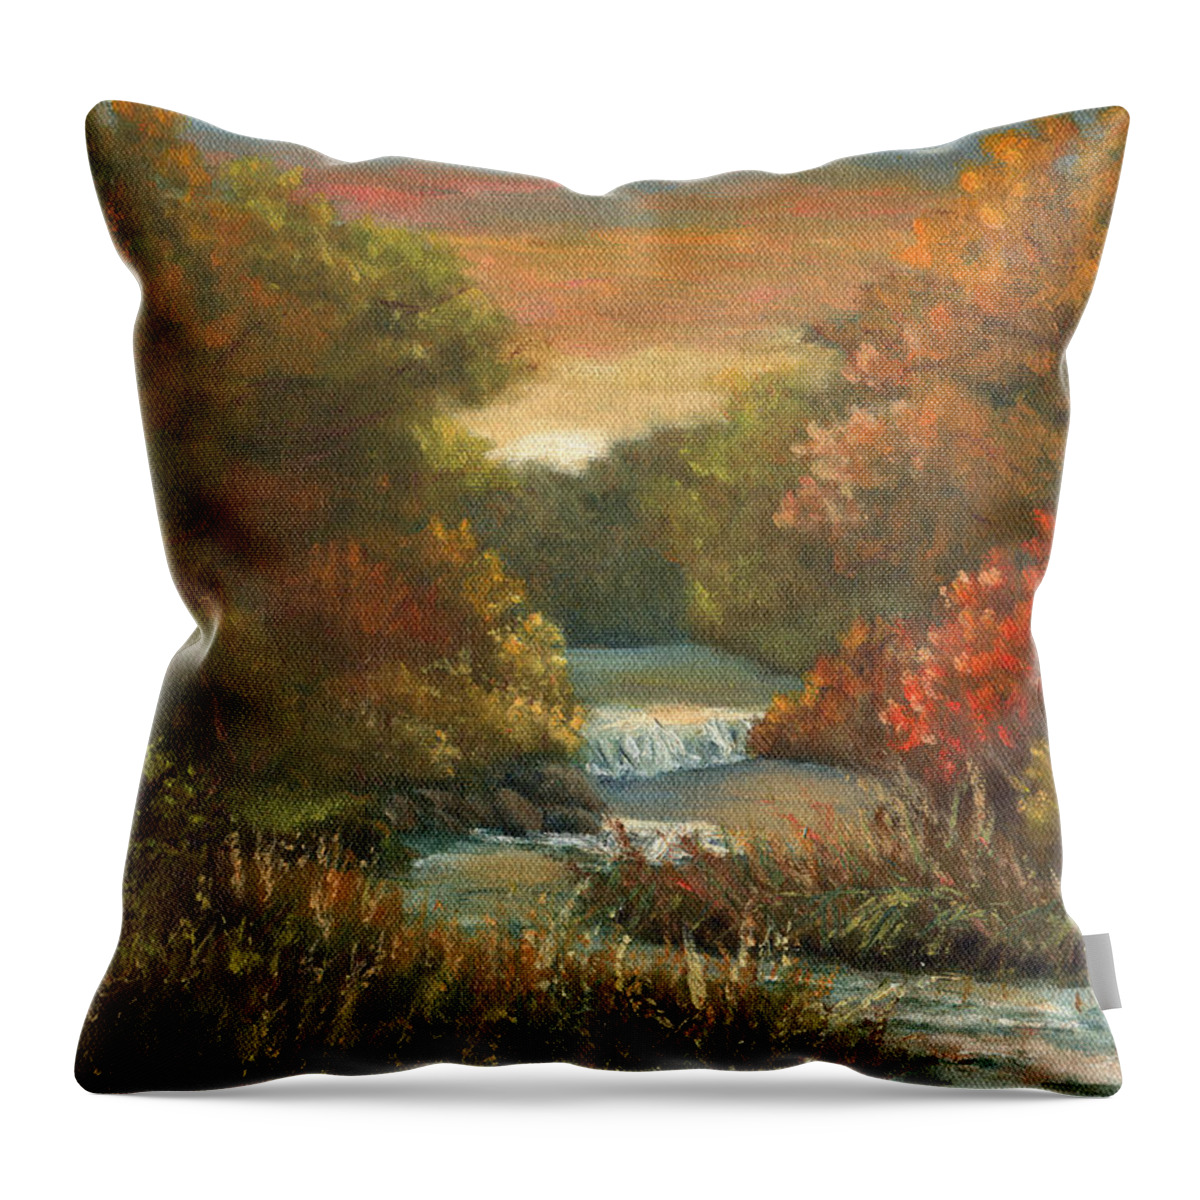 Sunset Throw Pillow featuring the painting Sunset Glow by Sharon E Allen